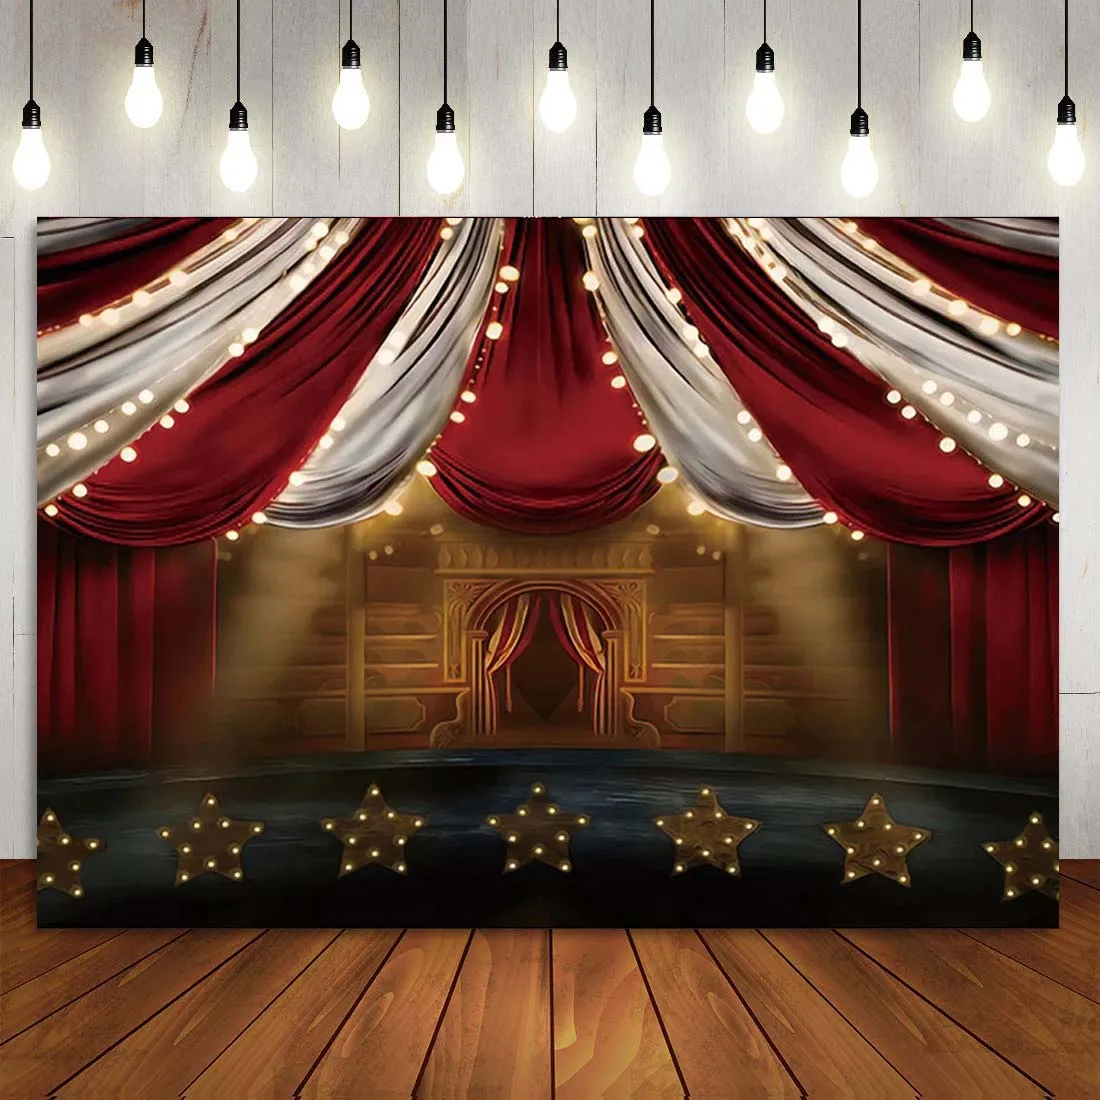 

Indoor Circus Theme Clown Play Show Red Curtain Baby Child Photography Backdrop Ferris Wheel Neon Party Banner Background Photo